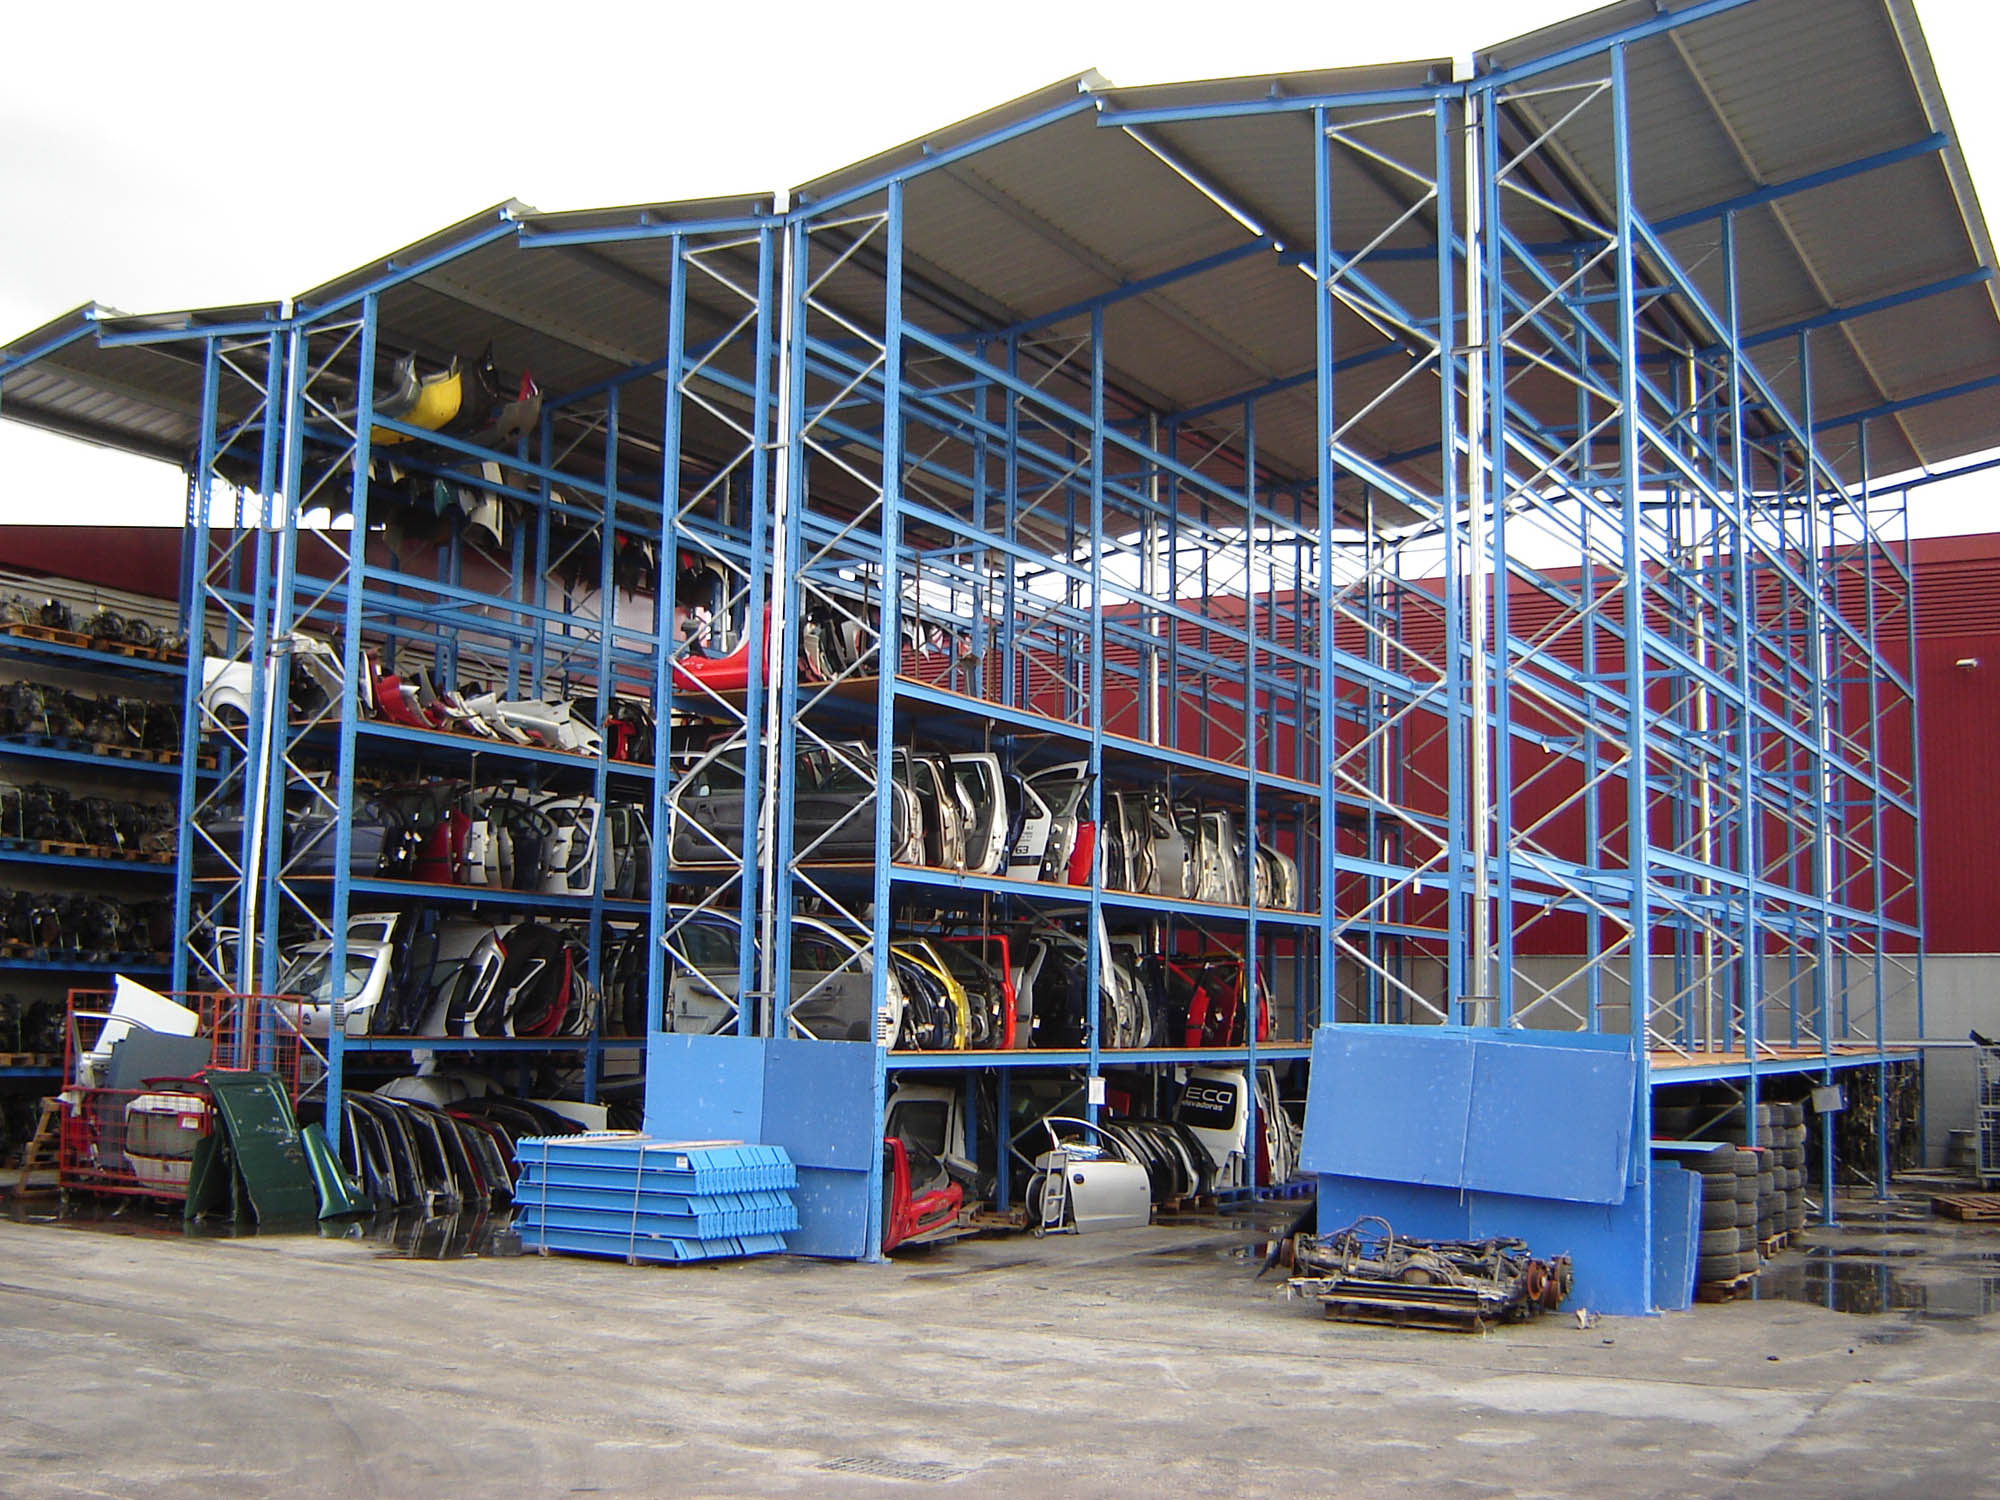 pallet racking for the storage of End-Of-Life-Vehicles (ELV storage)